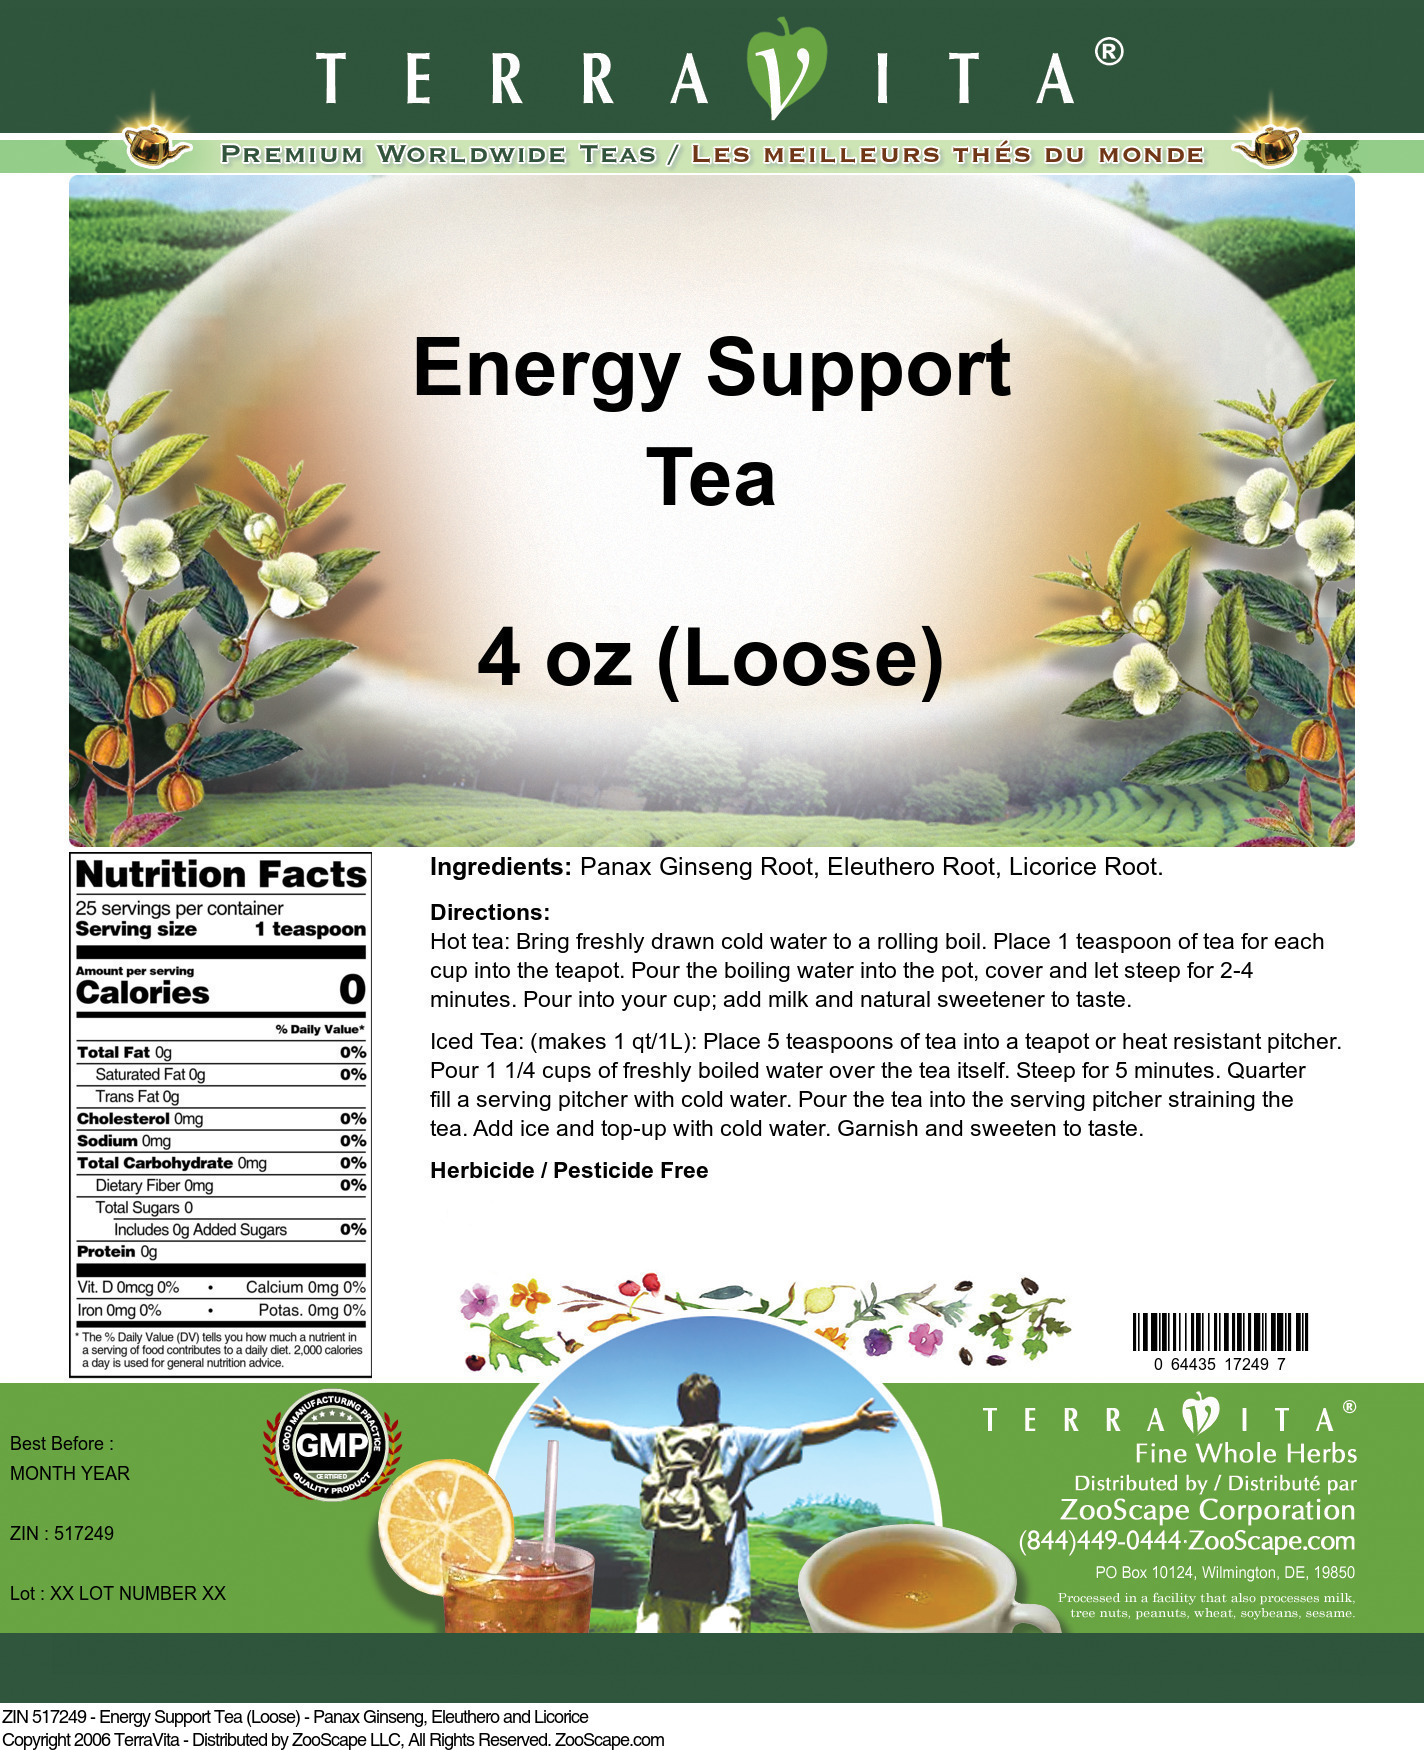 Energy Support Tea (Loose) - Panax Ginseng, Eleuthero and Licorice - Label